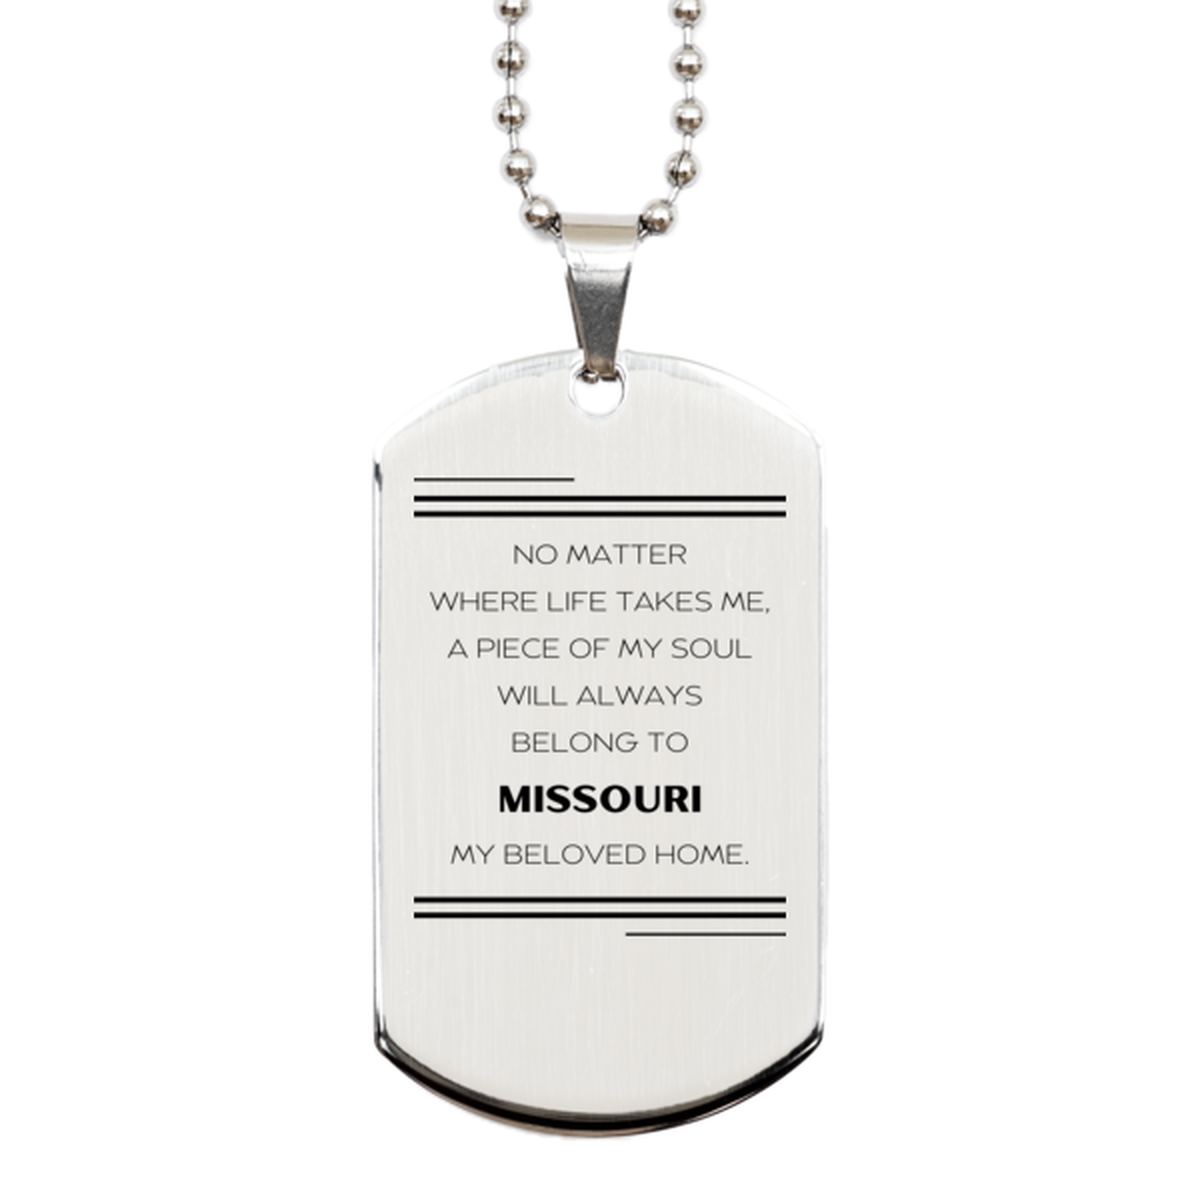 Love Missouri State Gifts, My soul will always belong to Missouri, Proud Silver Dog Tag, Birthday Unique Gifts For Missouri Men, Women, Friends